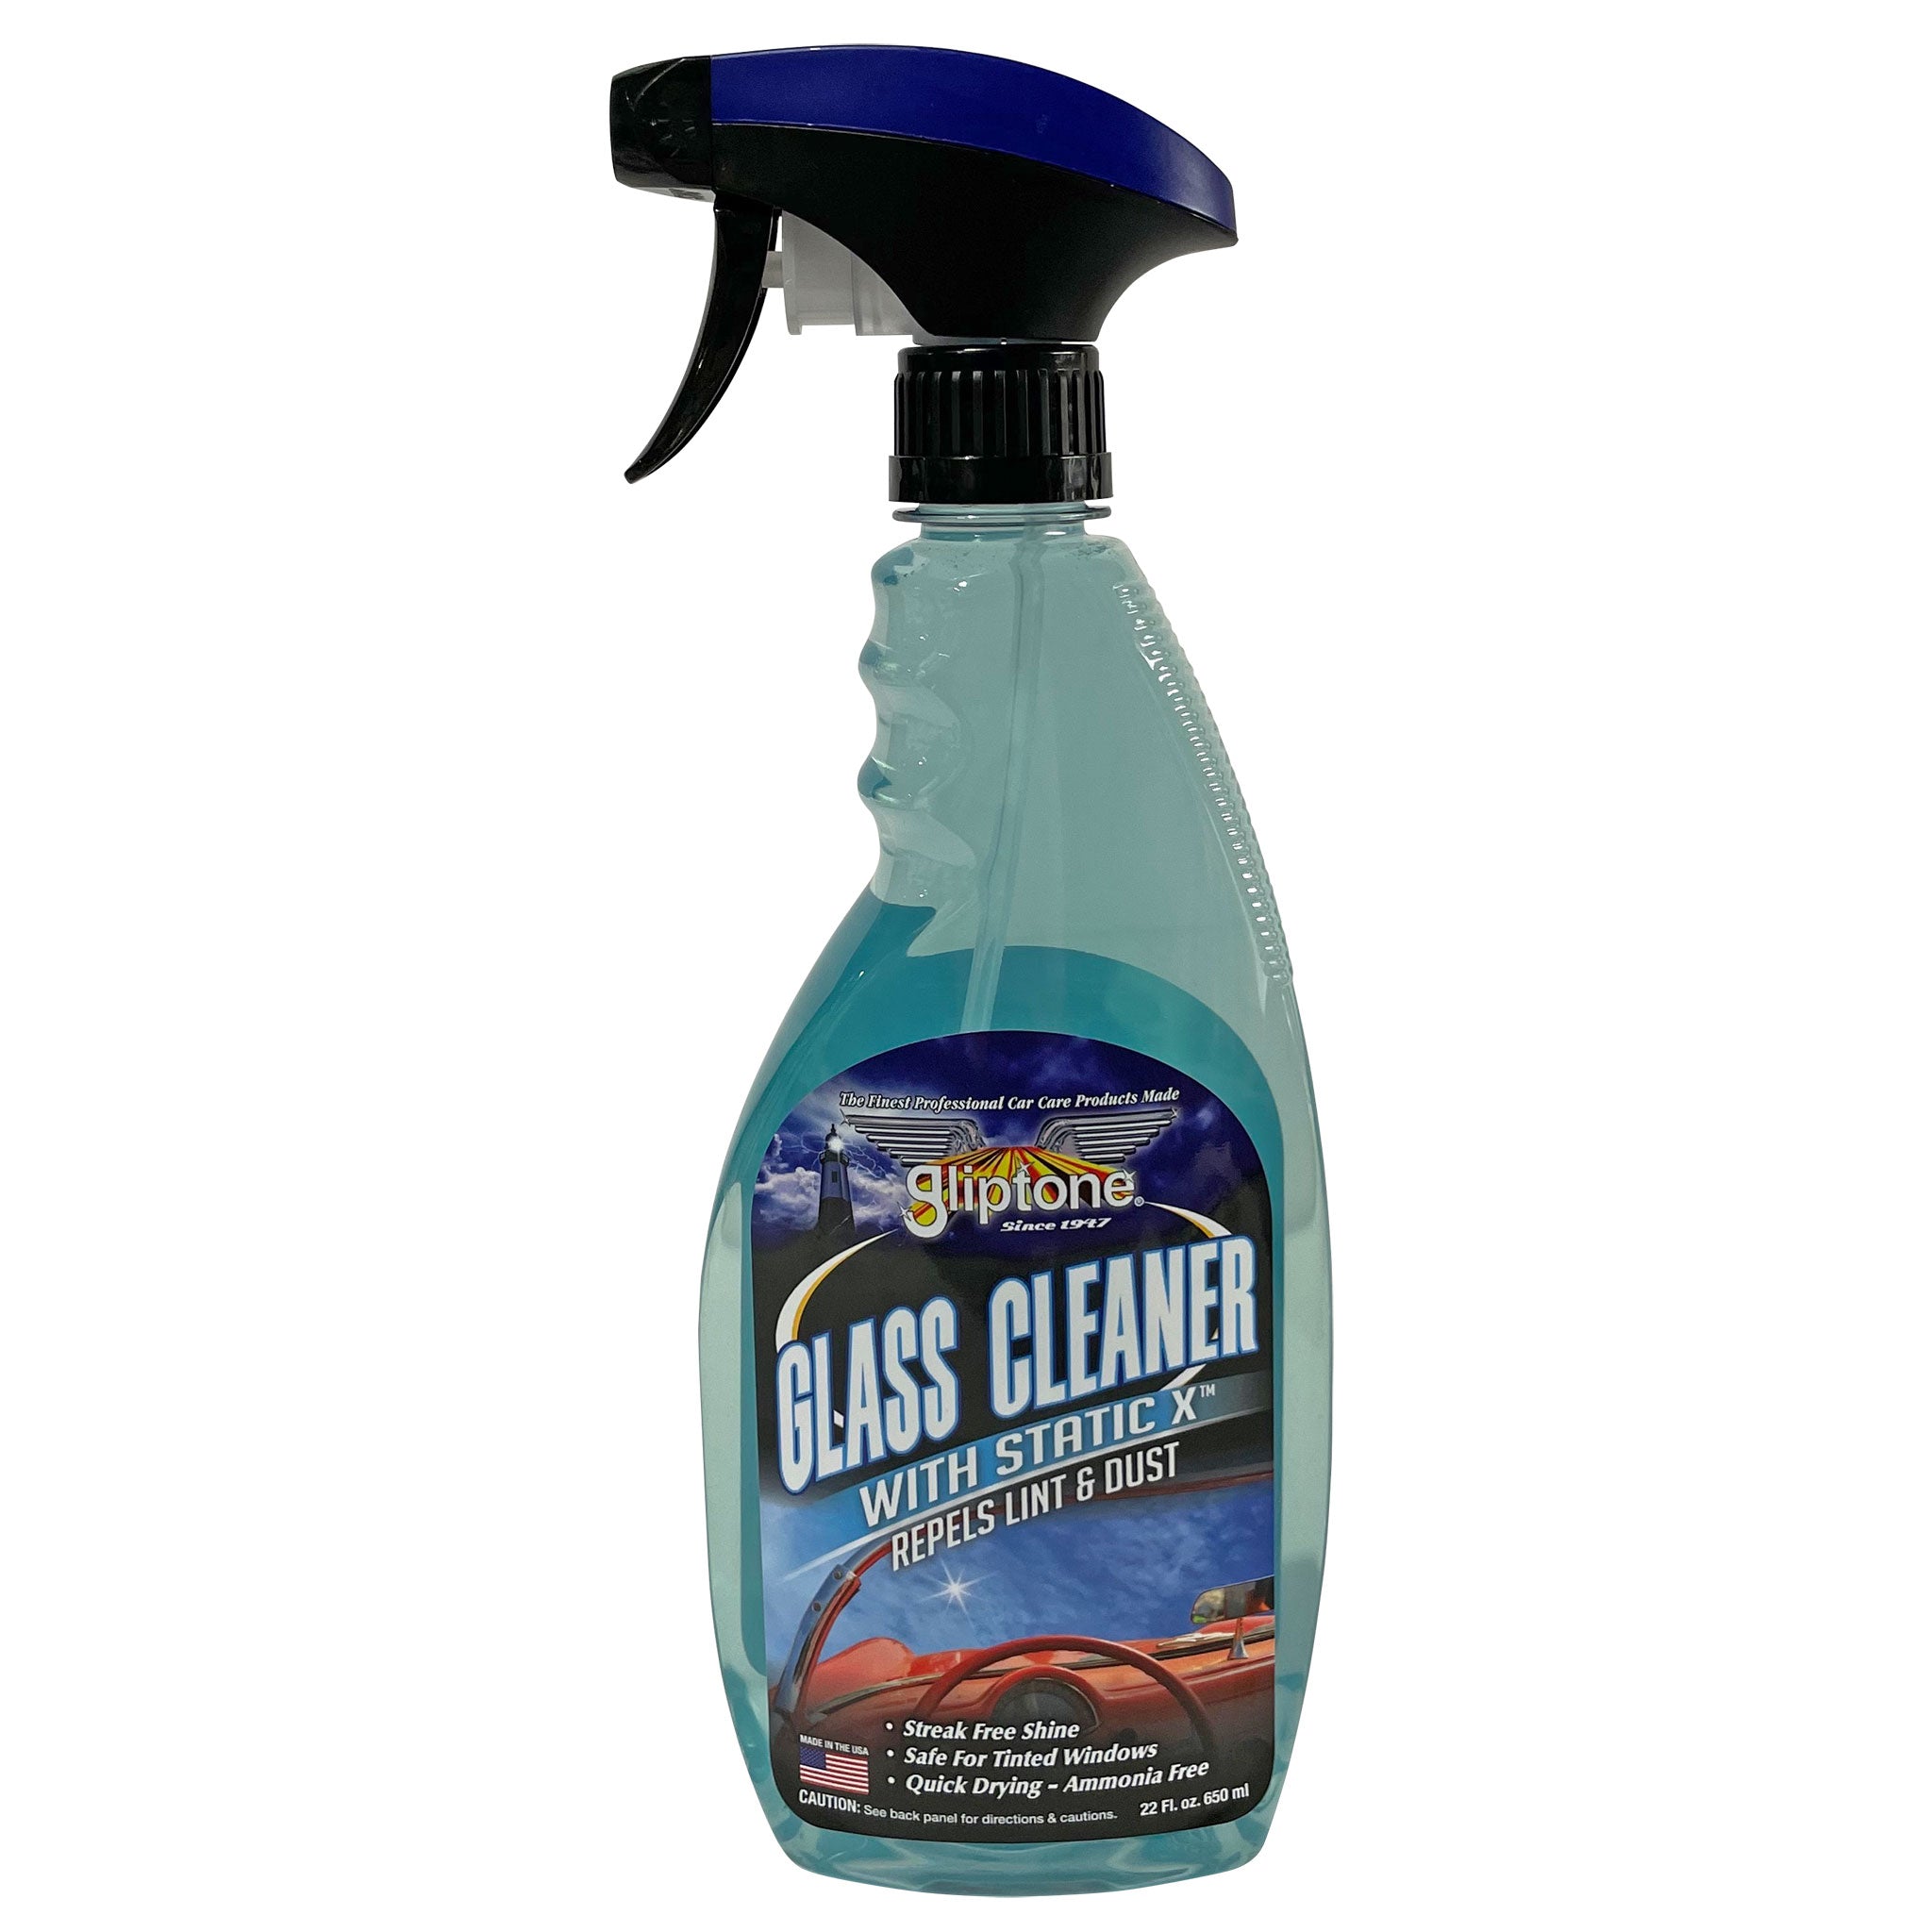 Glass Cleaner with Anti Static